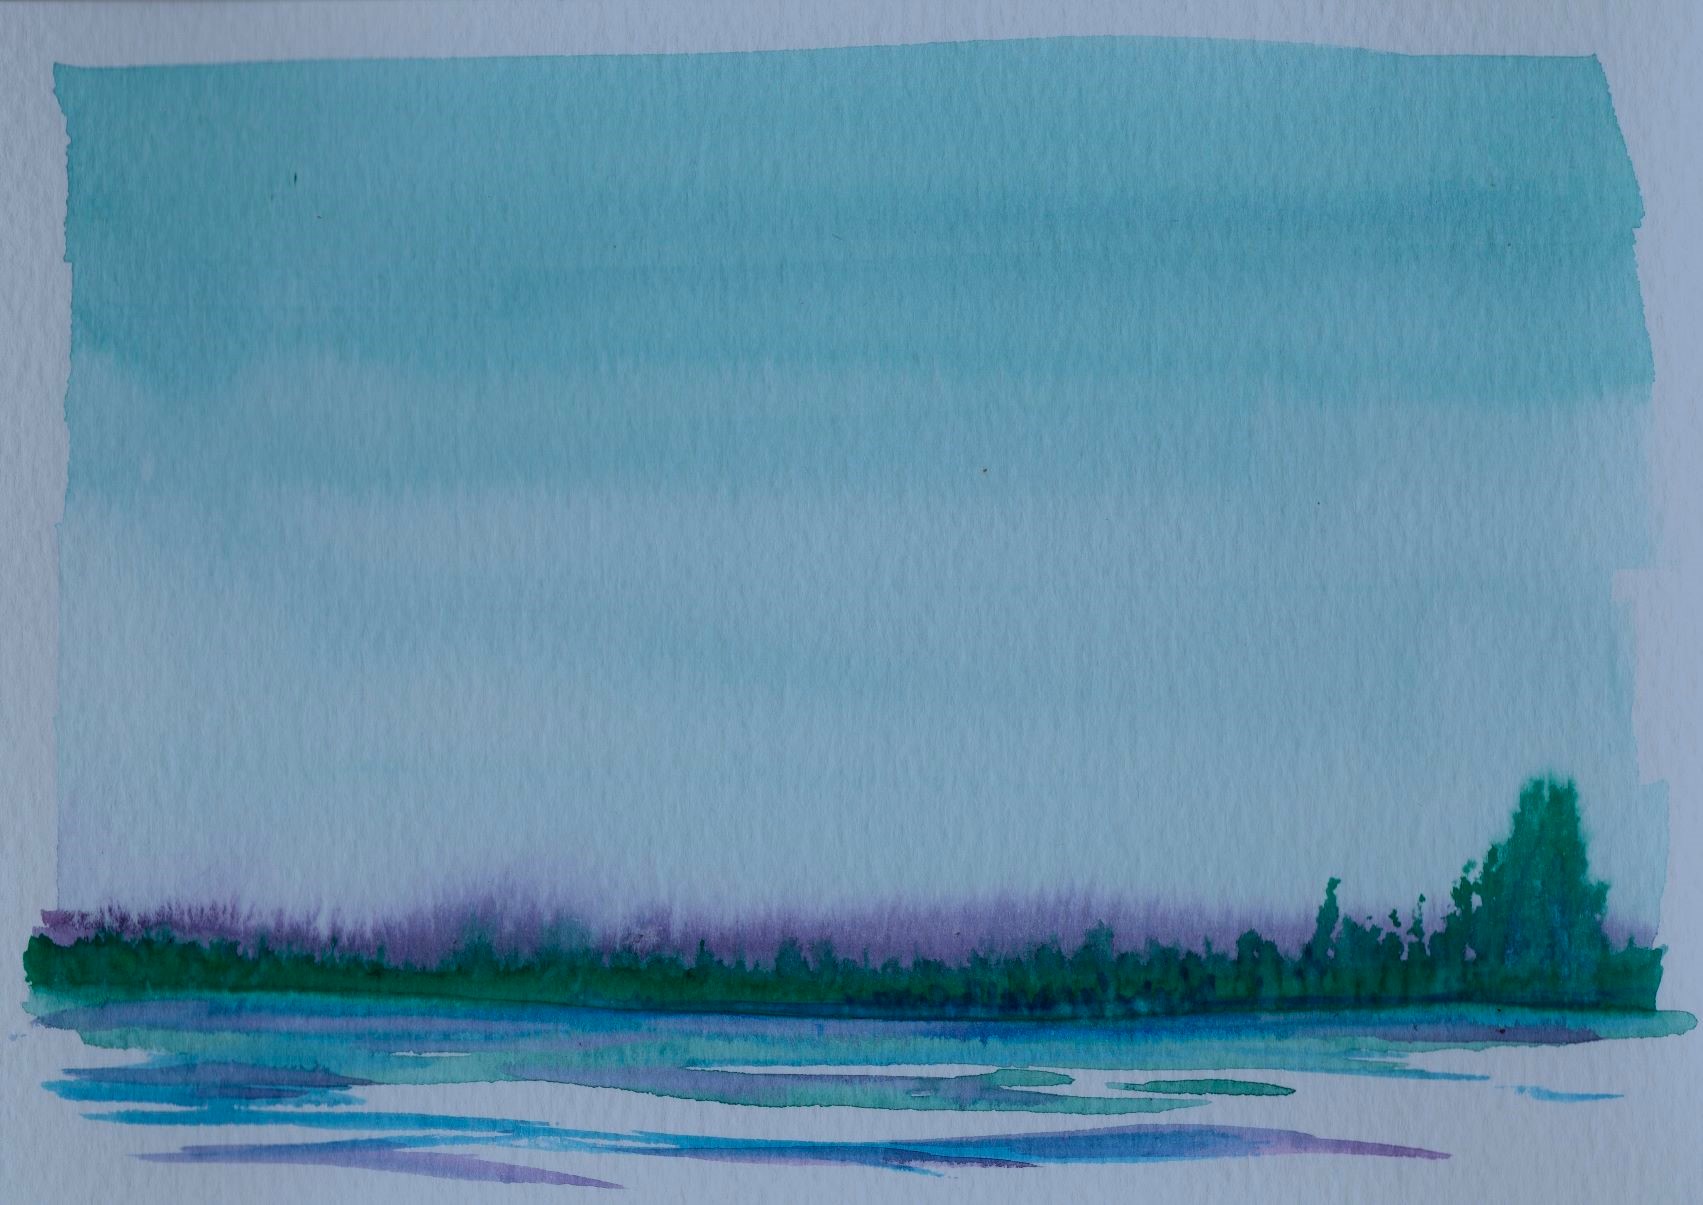 watercolor sky, water, distant trees
